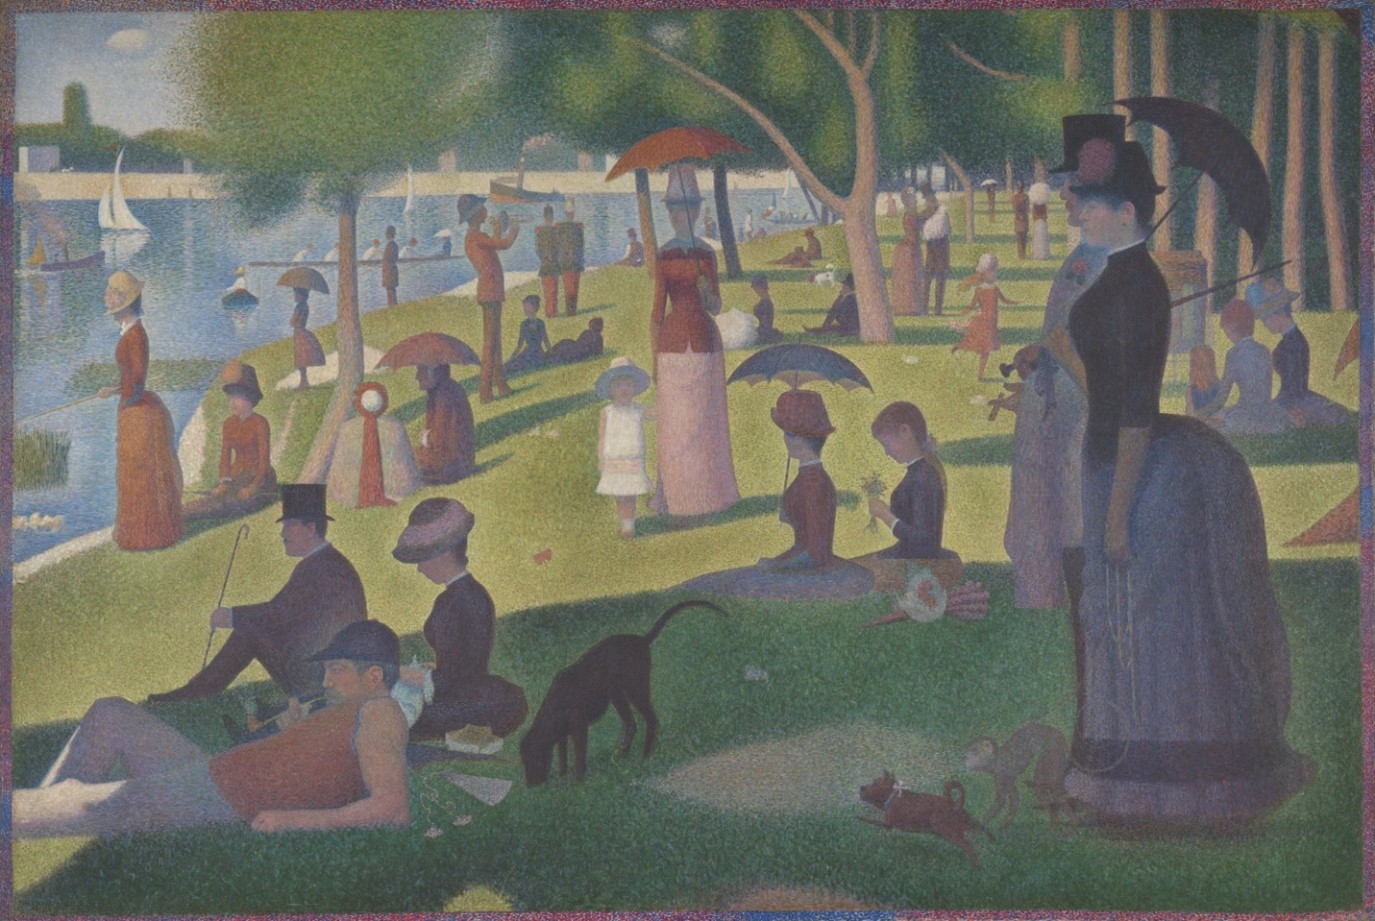 A painting depicts a crowd of individuals of different social classes strolling and relaxing in a park along a river. Later adjustments to this painting will illustrate applications of privacy-preserving techniques.